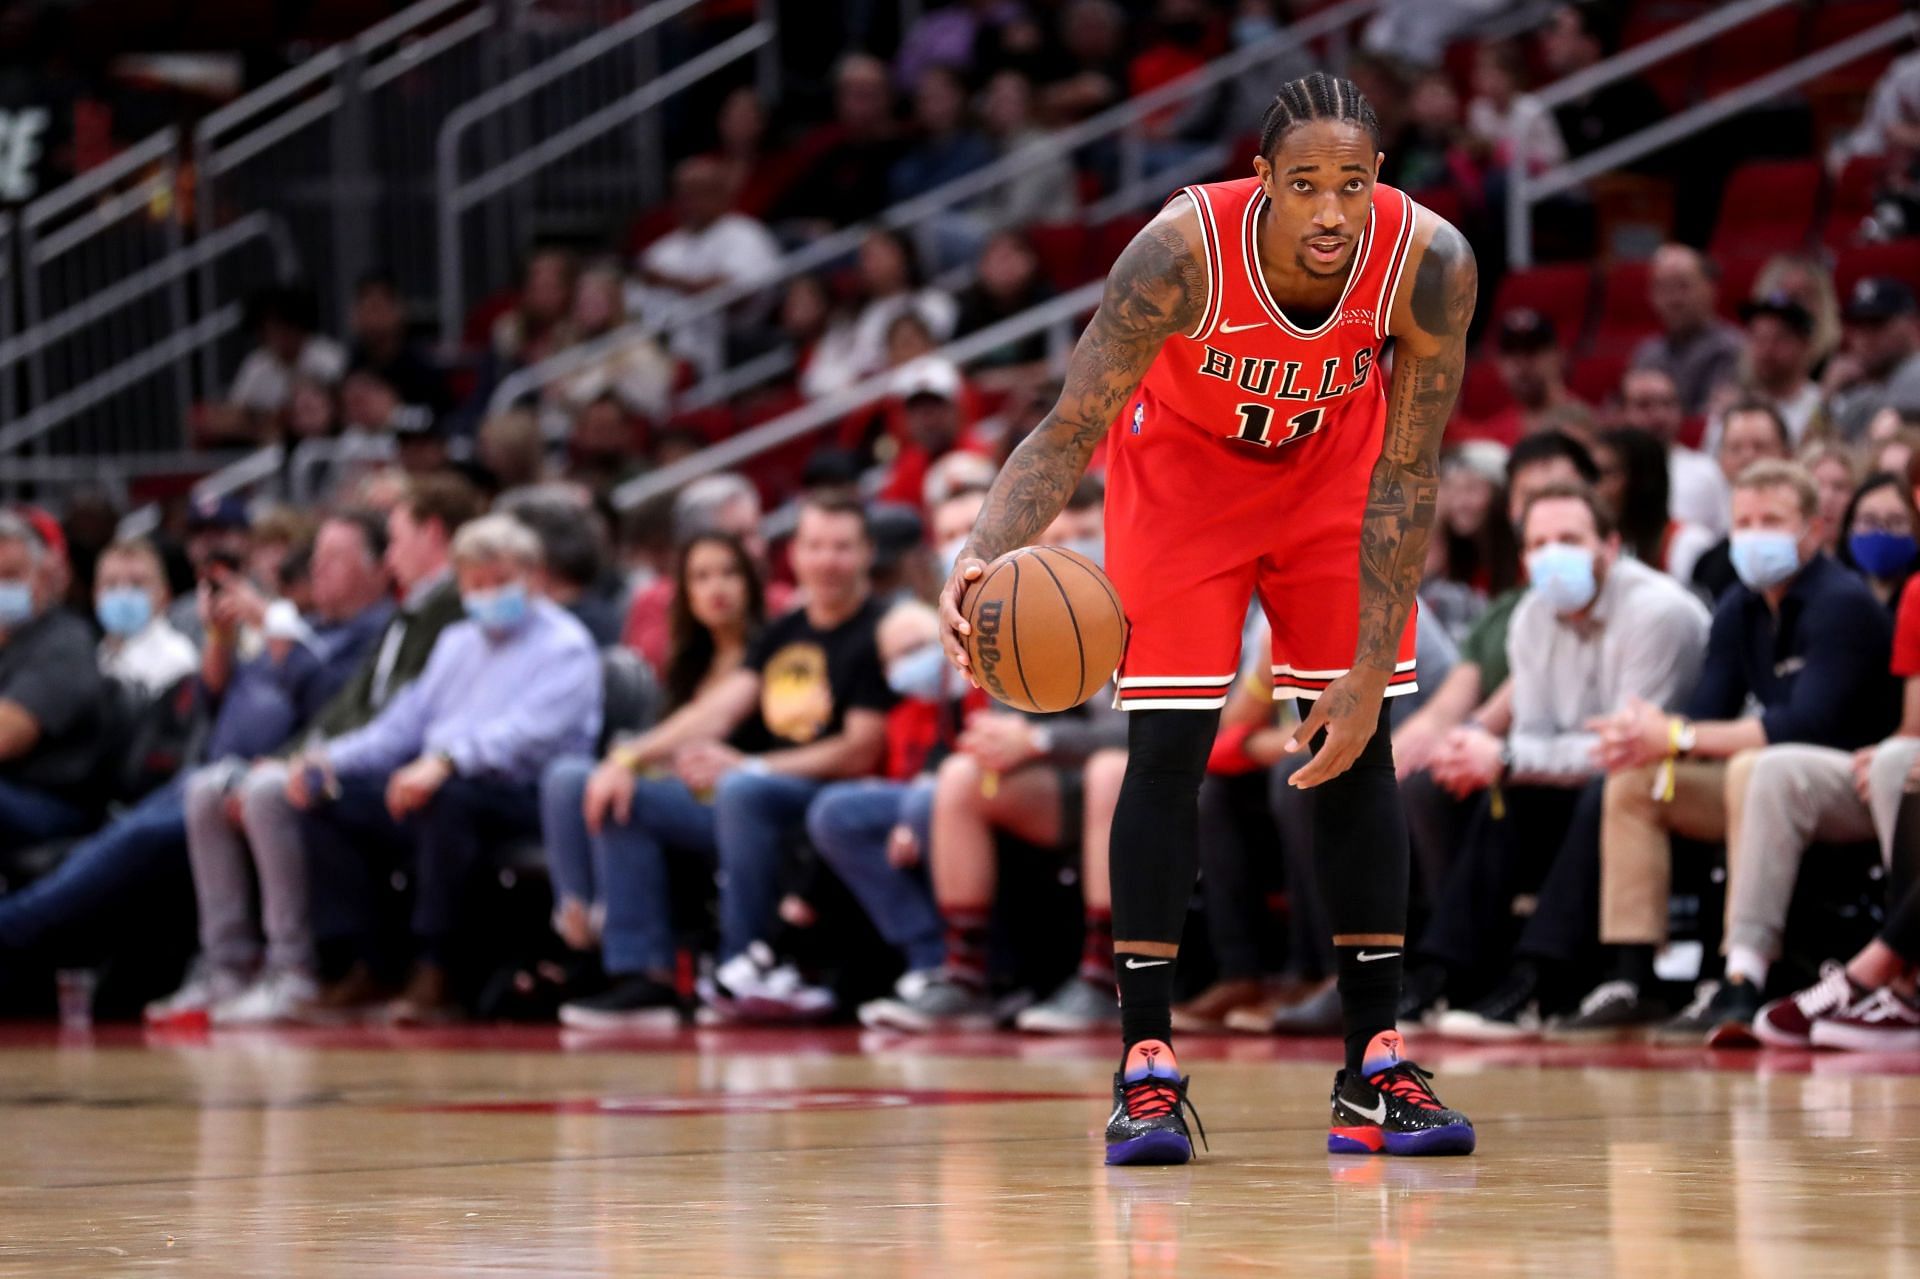 DeMar DeRozan returned to action for the Chicago Bulls